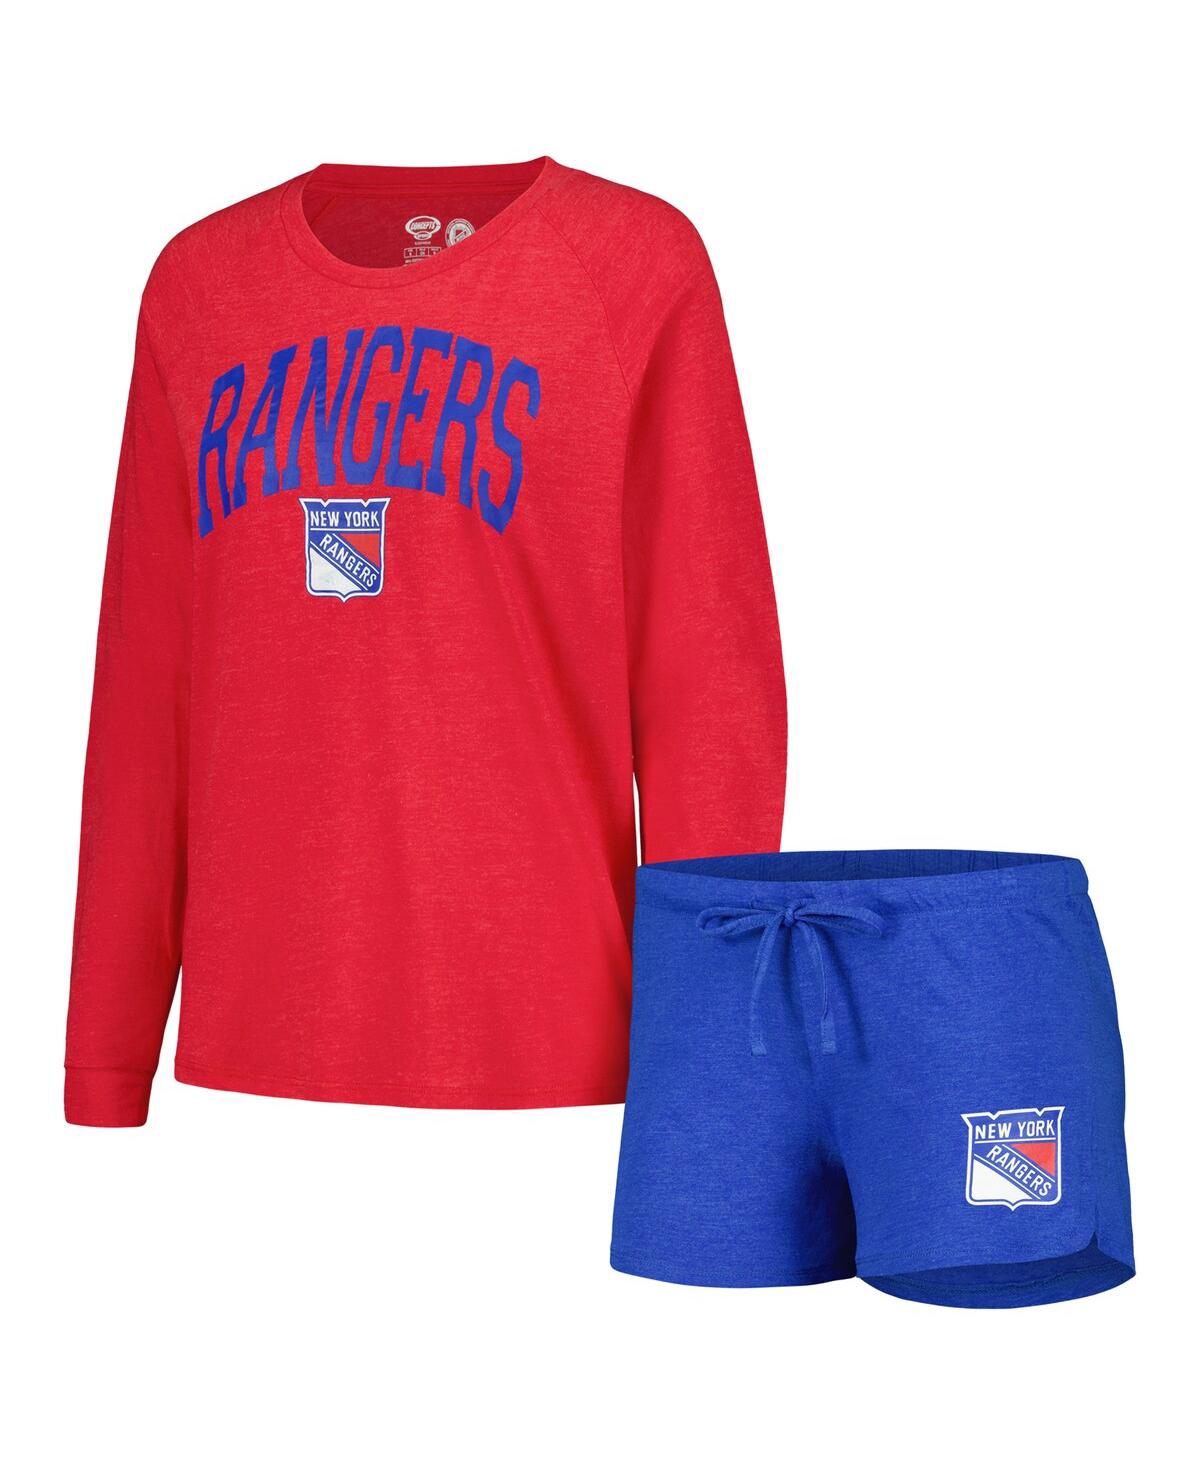 CONCEPTS SPORT WOMEN'S CONCEPTS SPORT BLUE, RED NEW YORK RANGERS METER KNIT LONG SLEEVE RAGLAN TOP AND SHORTS SLEEP